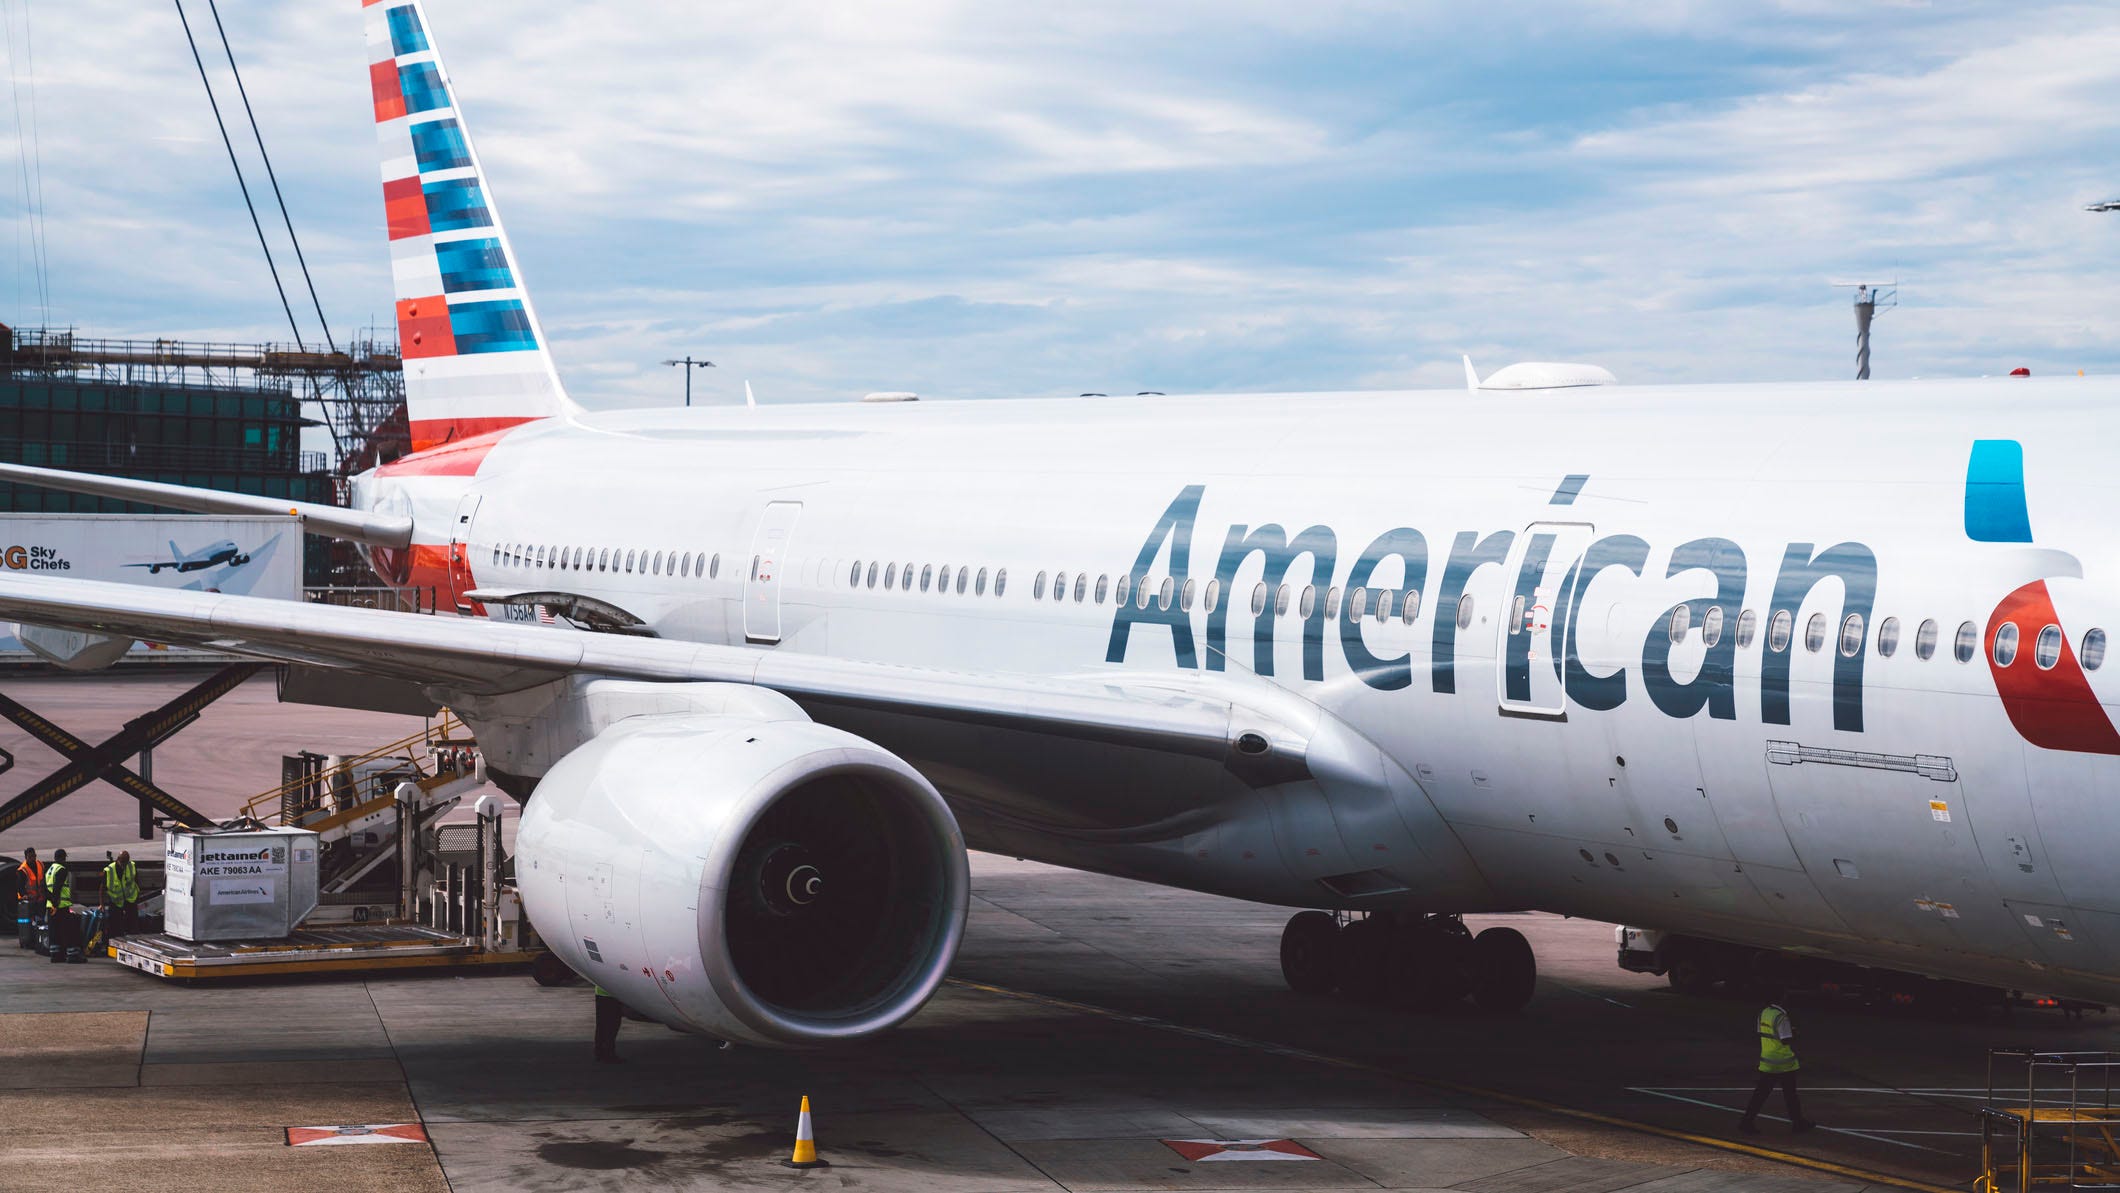 American Airlines apologizes to cancer survivor over sweatshirt with expletive